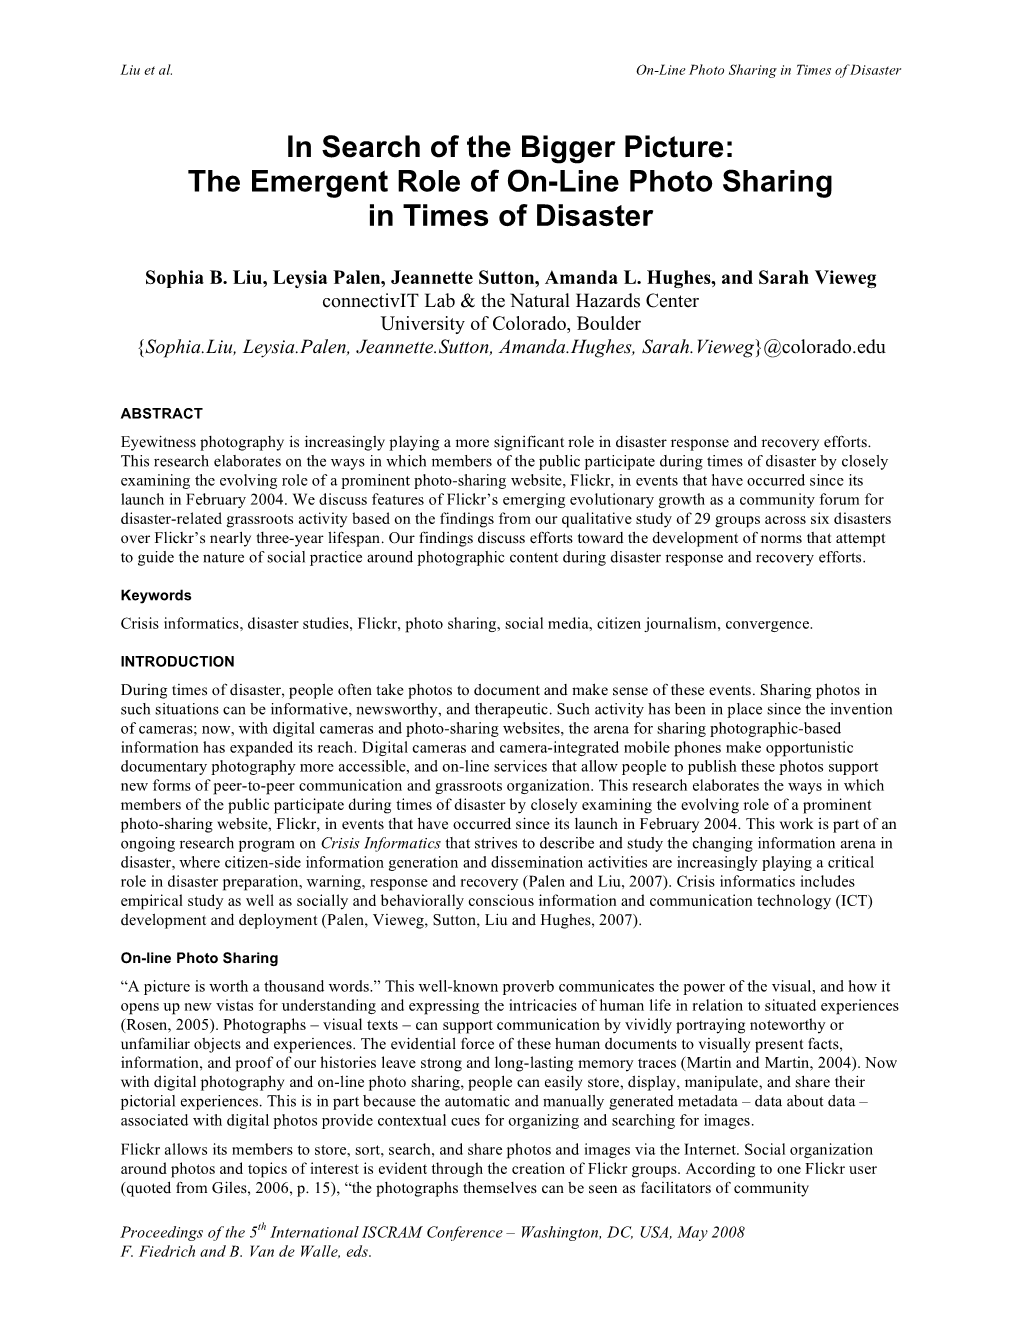 In Search of the Bigger Picture: the Emergent Role of On-Line Photo Sharing in Times of Disaster